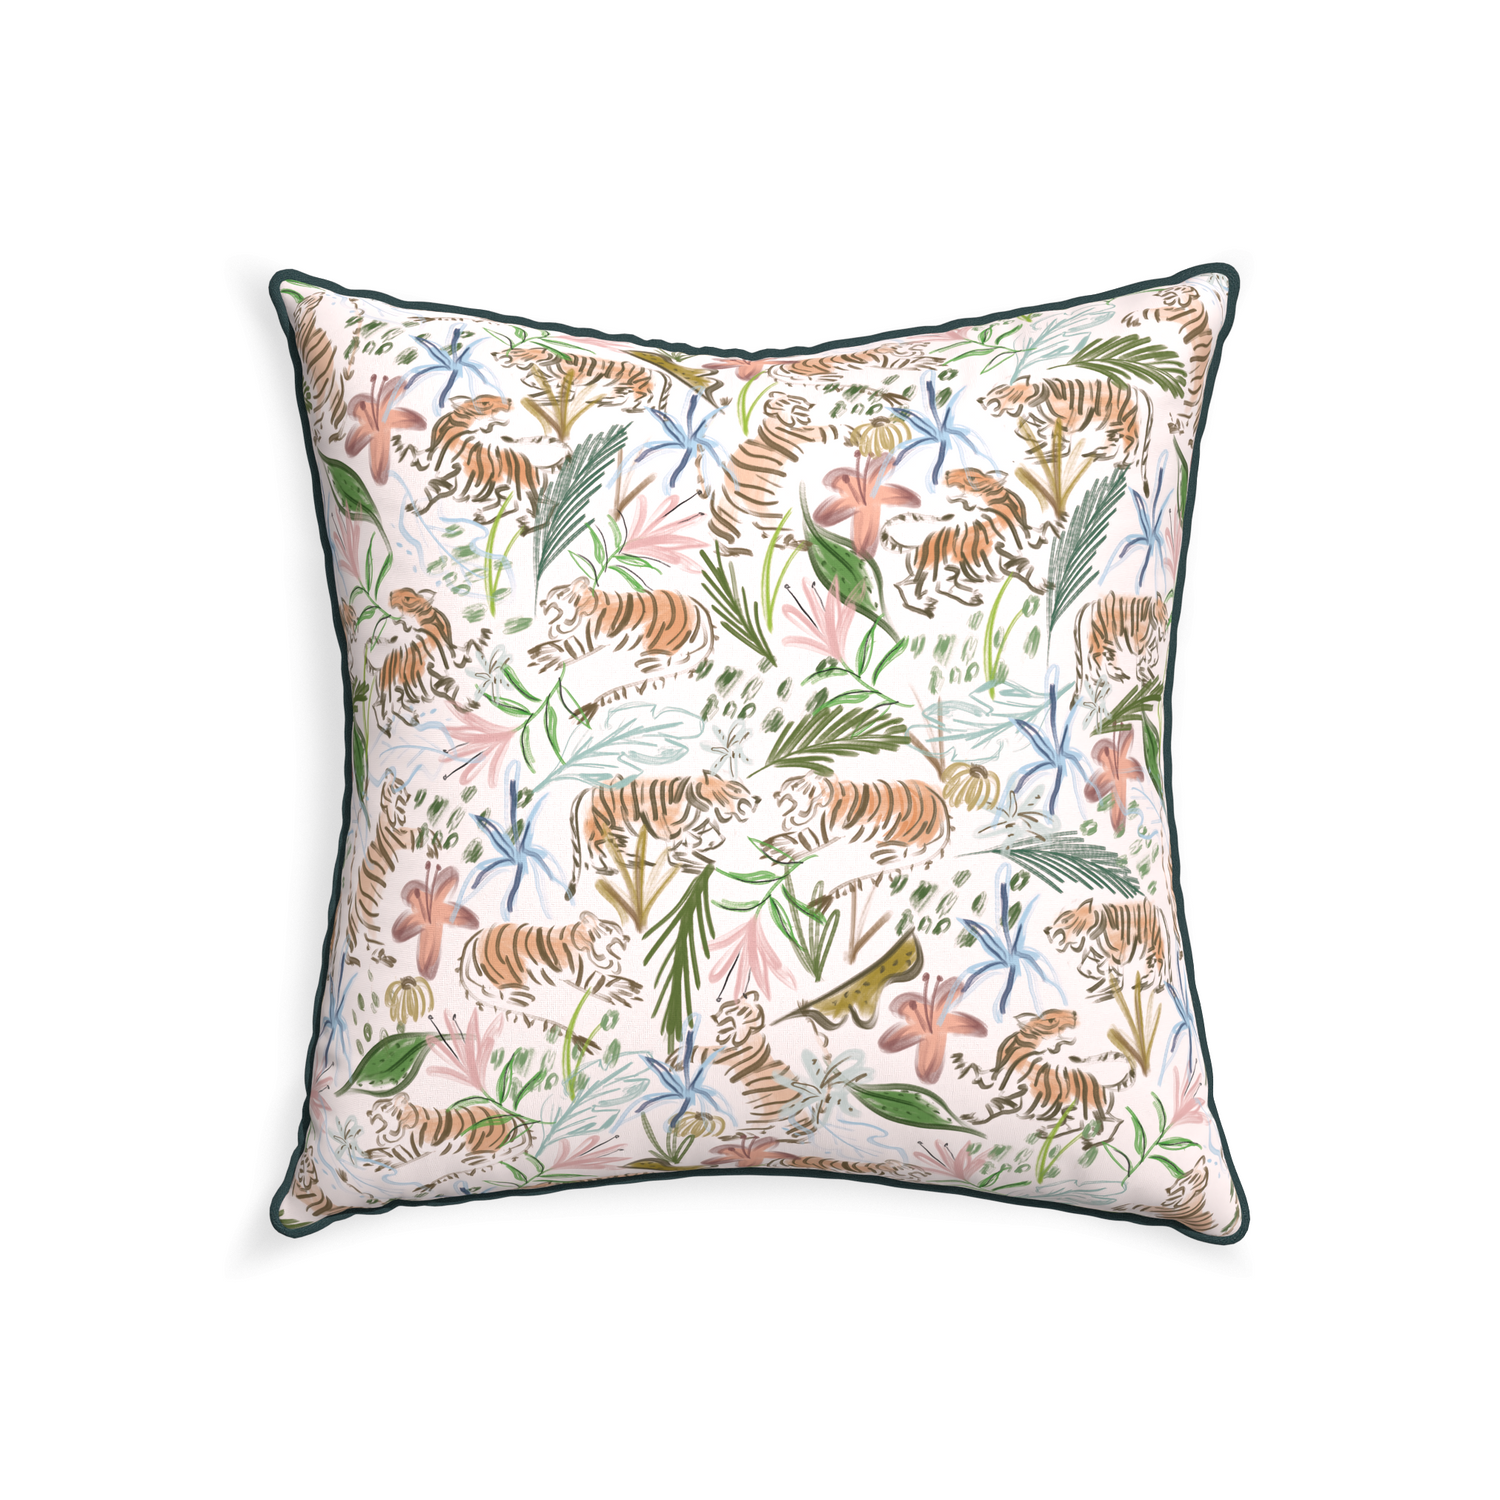 22-square frida pink custom pink chinoiserie tigerpillow with p piping on white background